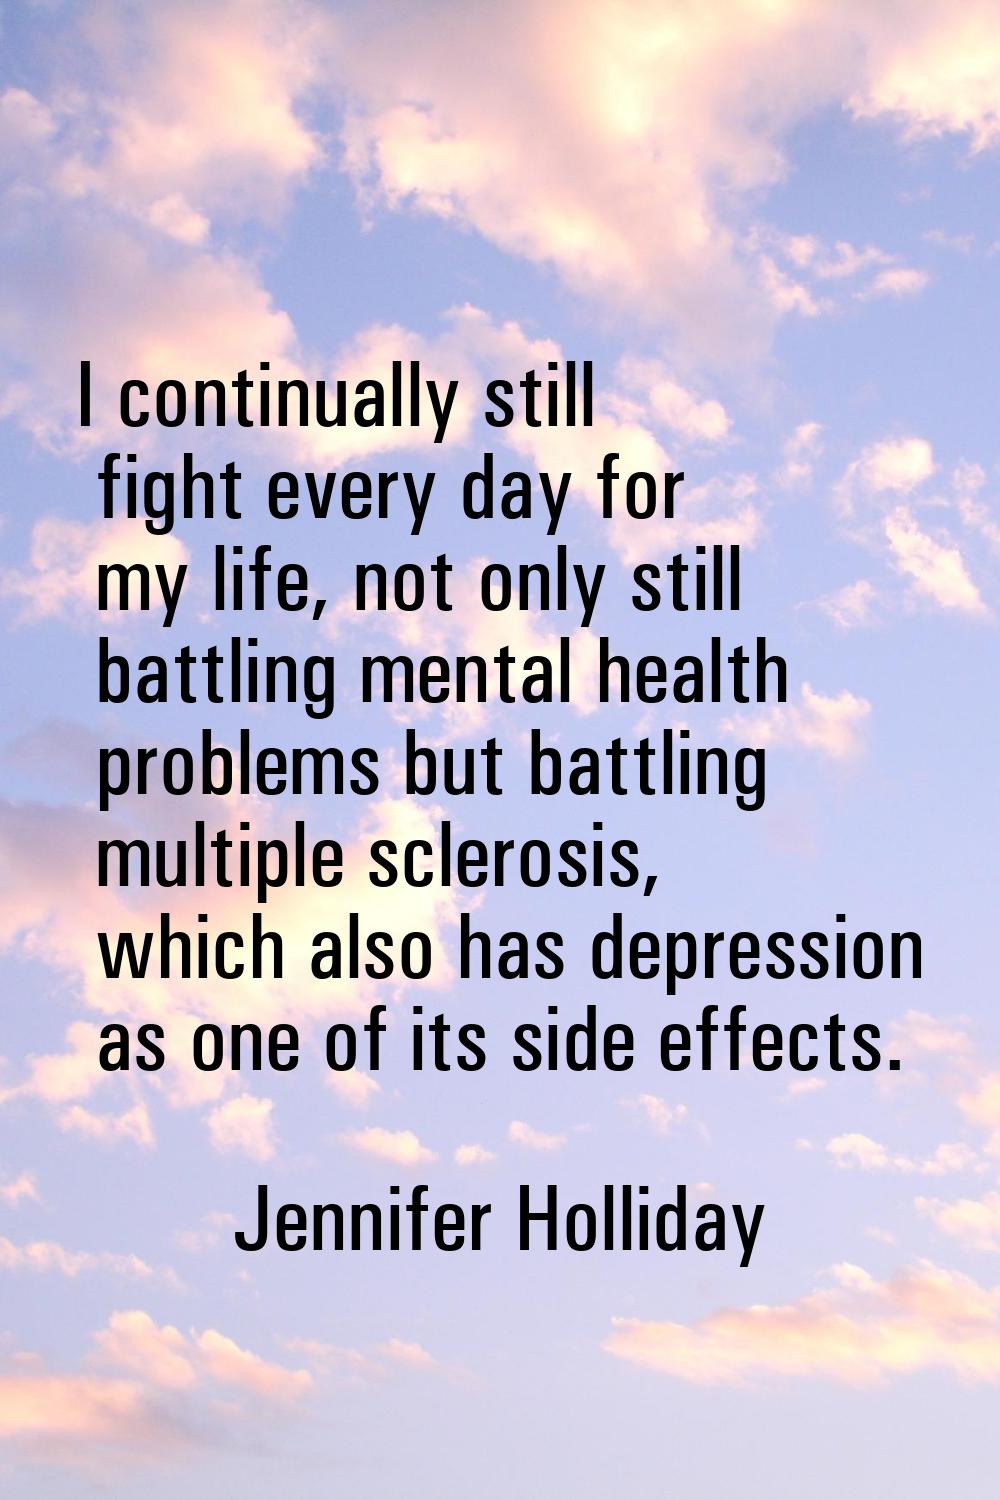 I continually still fight every day for my life, not only still battling mental health problems but